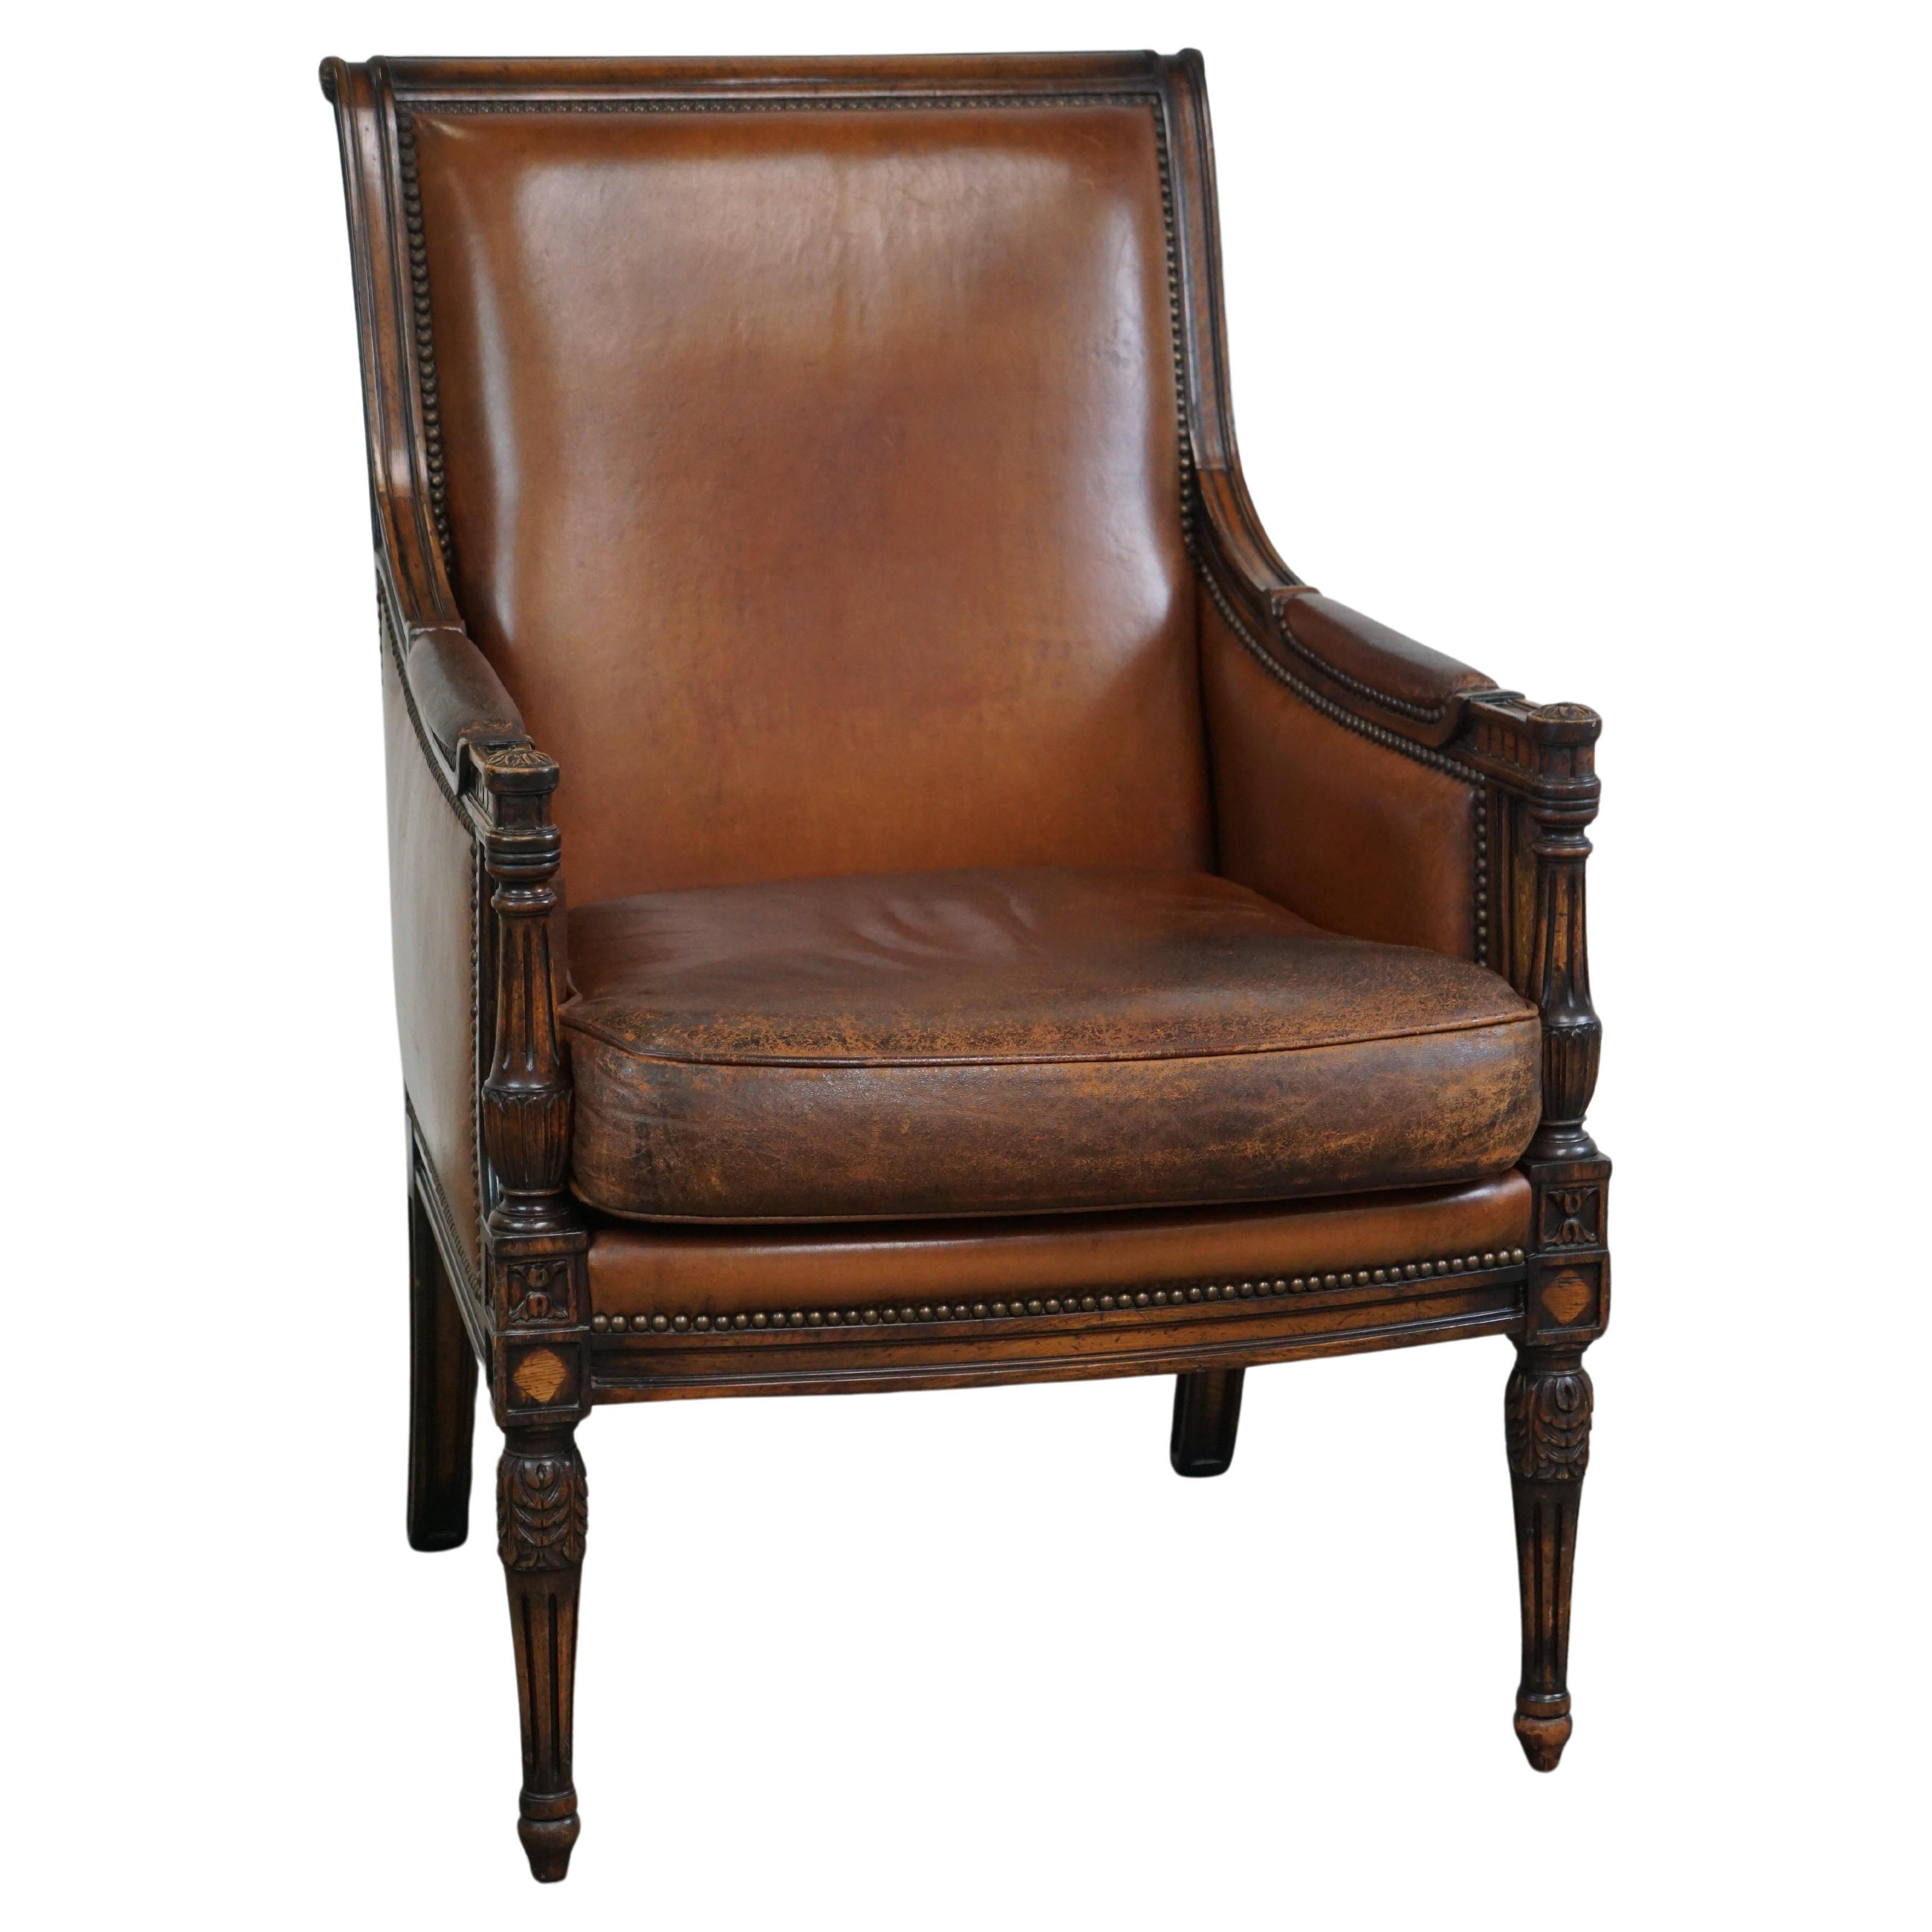 Charming classic sheep leather armchair with wood carving and a nice patina For Sale